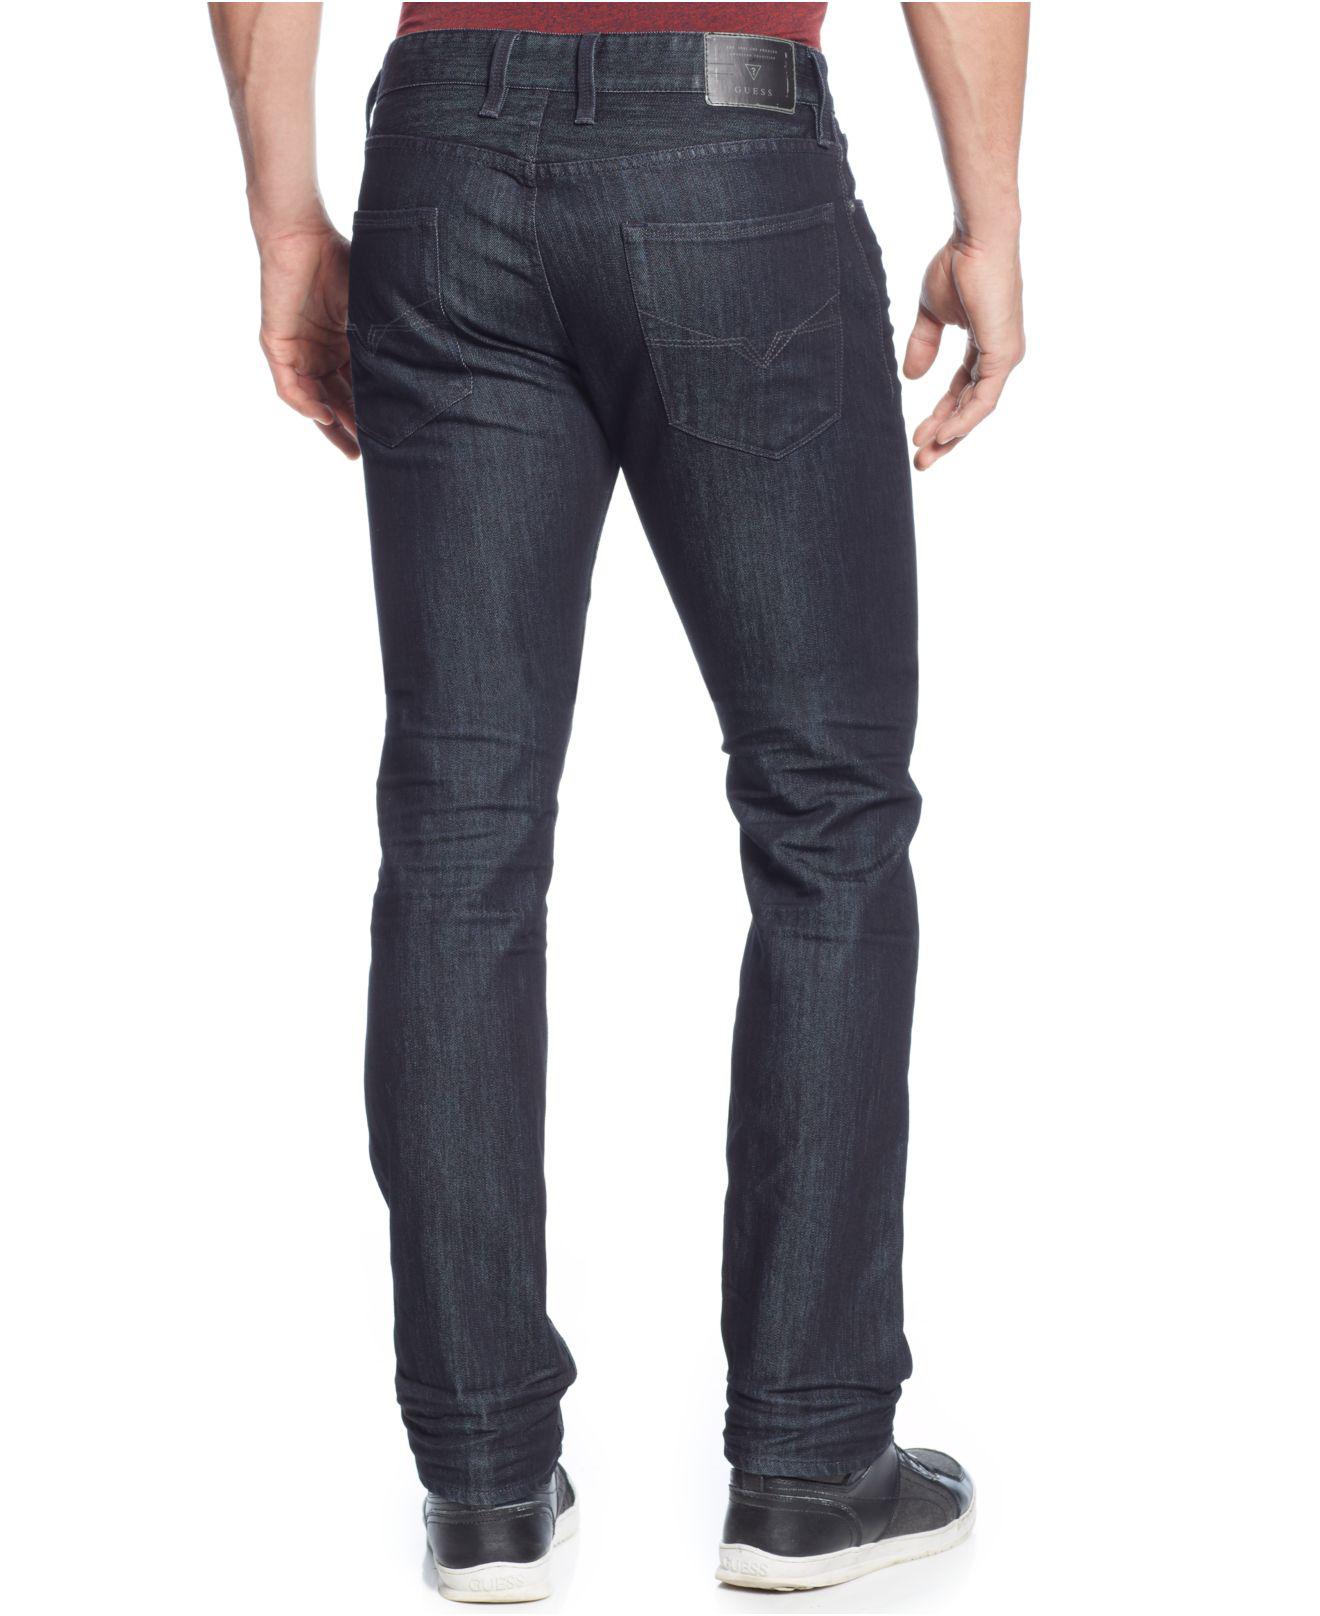 Lyst - Guess Slim-straight Smokescreen-wash Jeans in Blue for Men